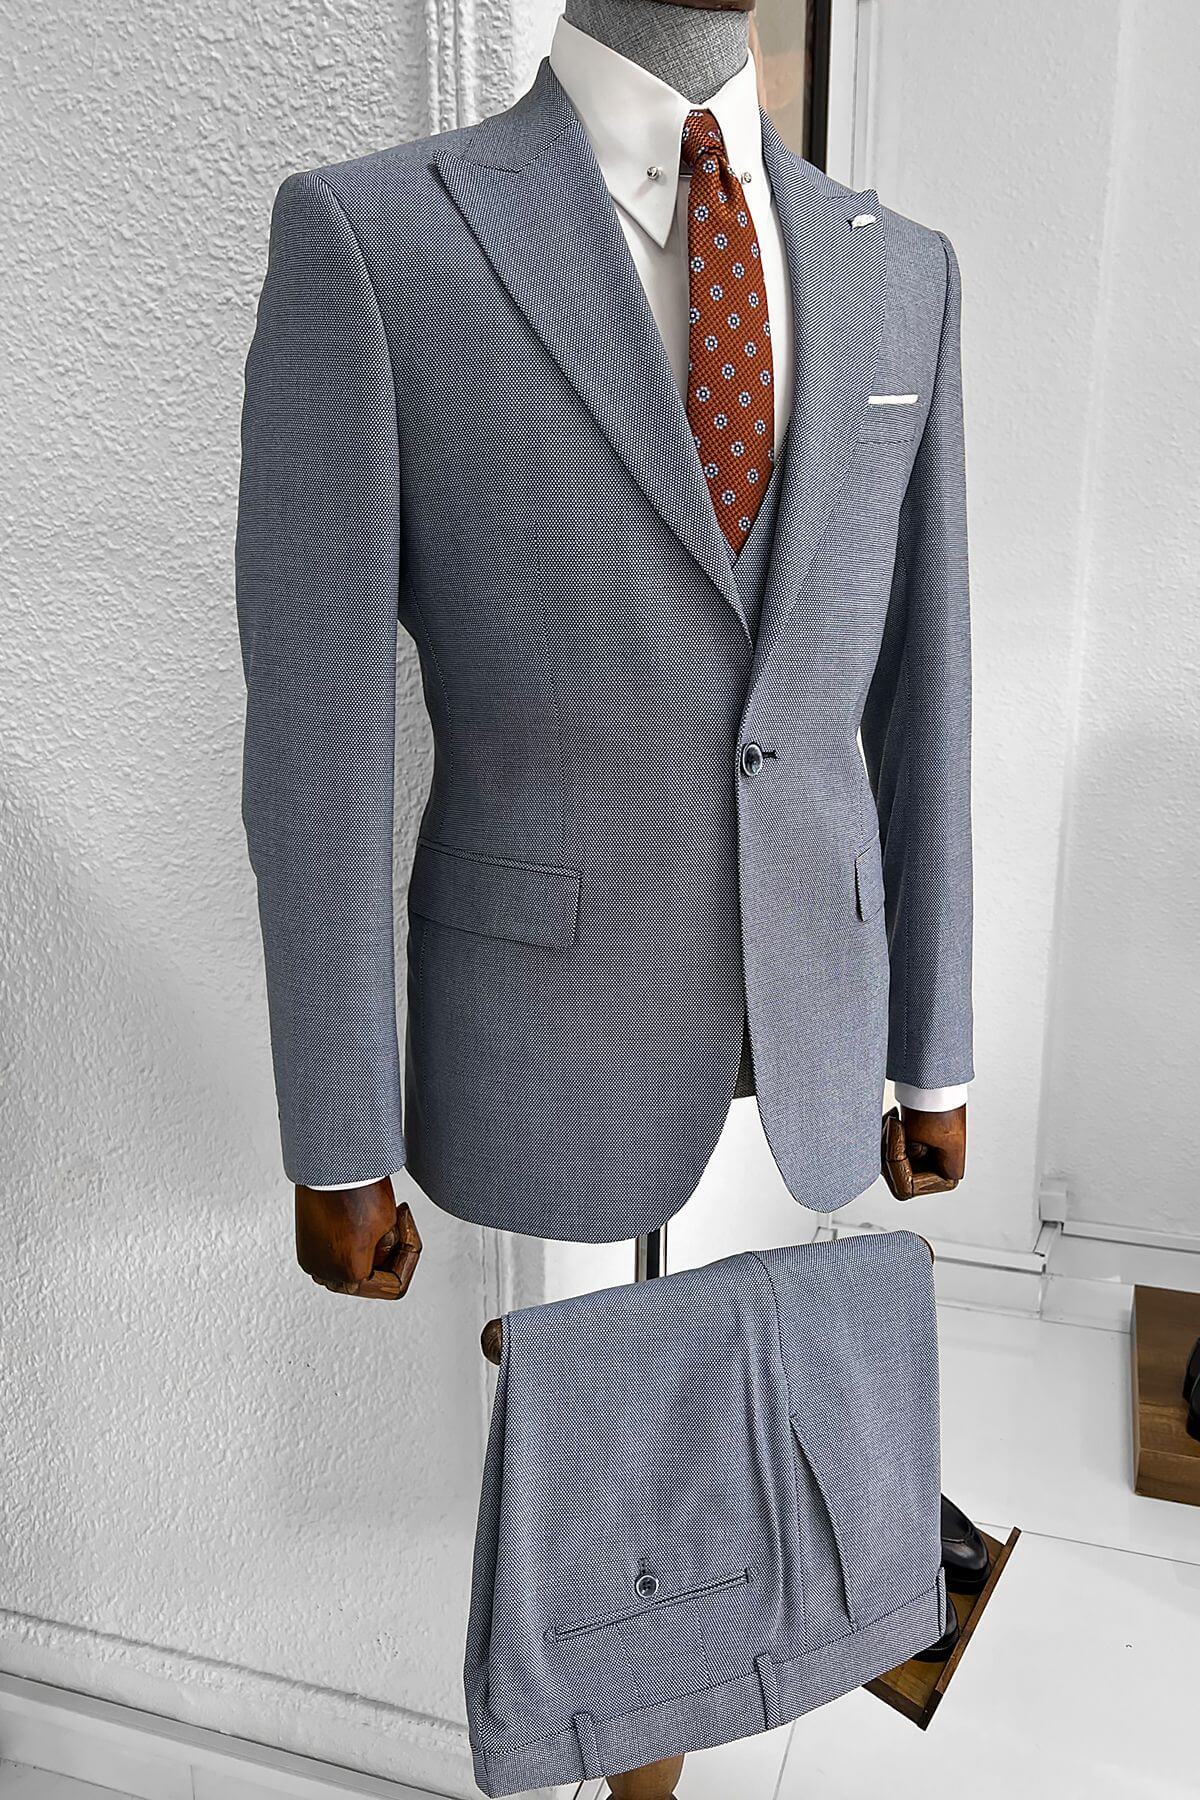 A Patterned Slim-fit Light Blue Wool Suit on display